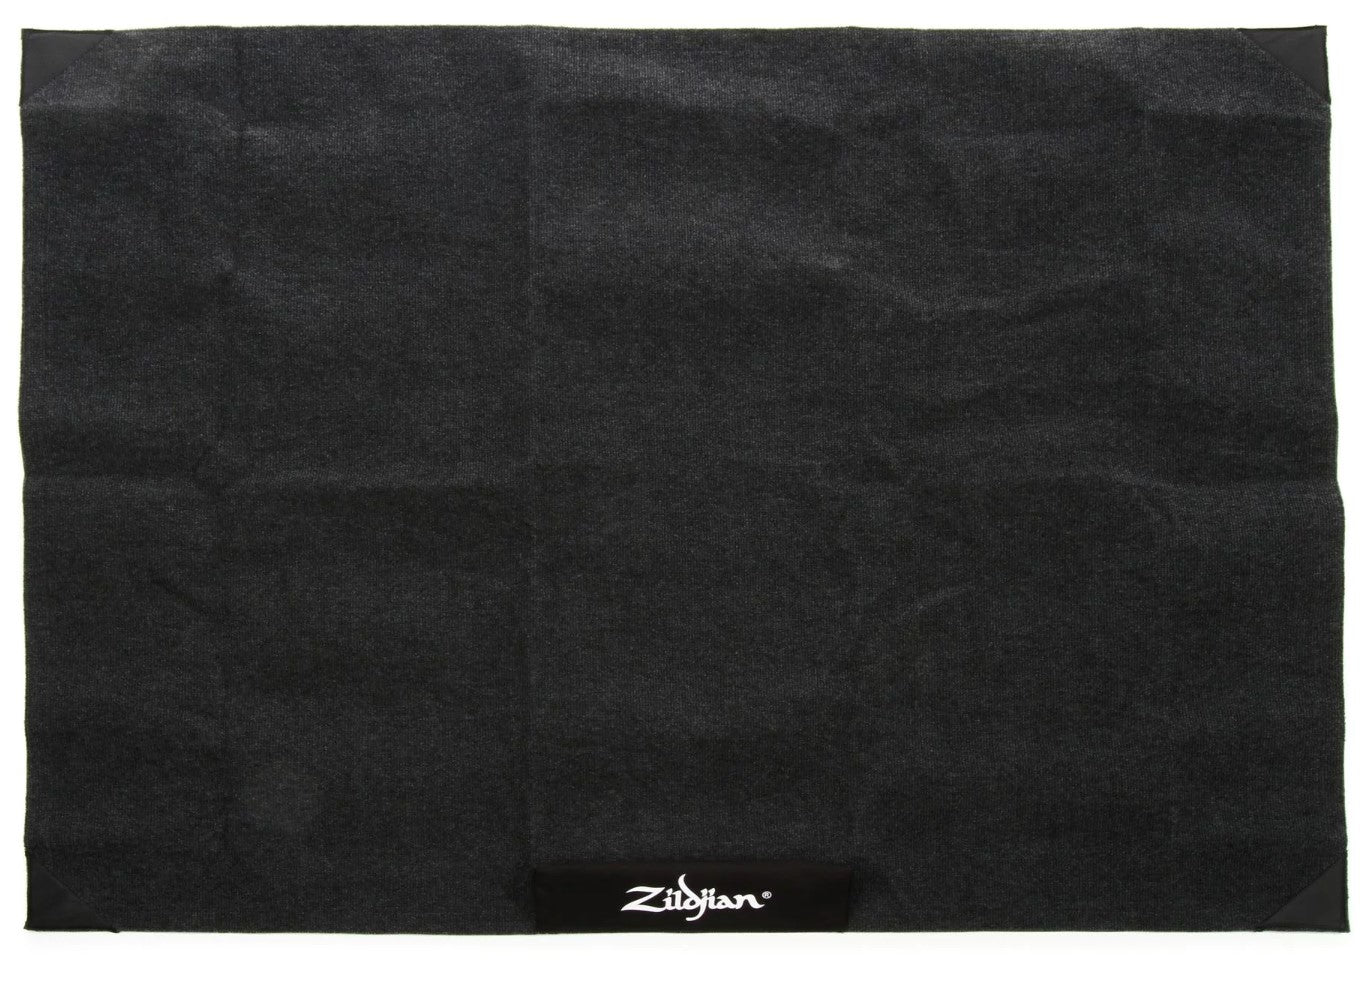 Zildjian Gig Drum Rug Polypropylene Fabric and Charcoal Grey Finish for Small Acoustic and Electronic Drums